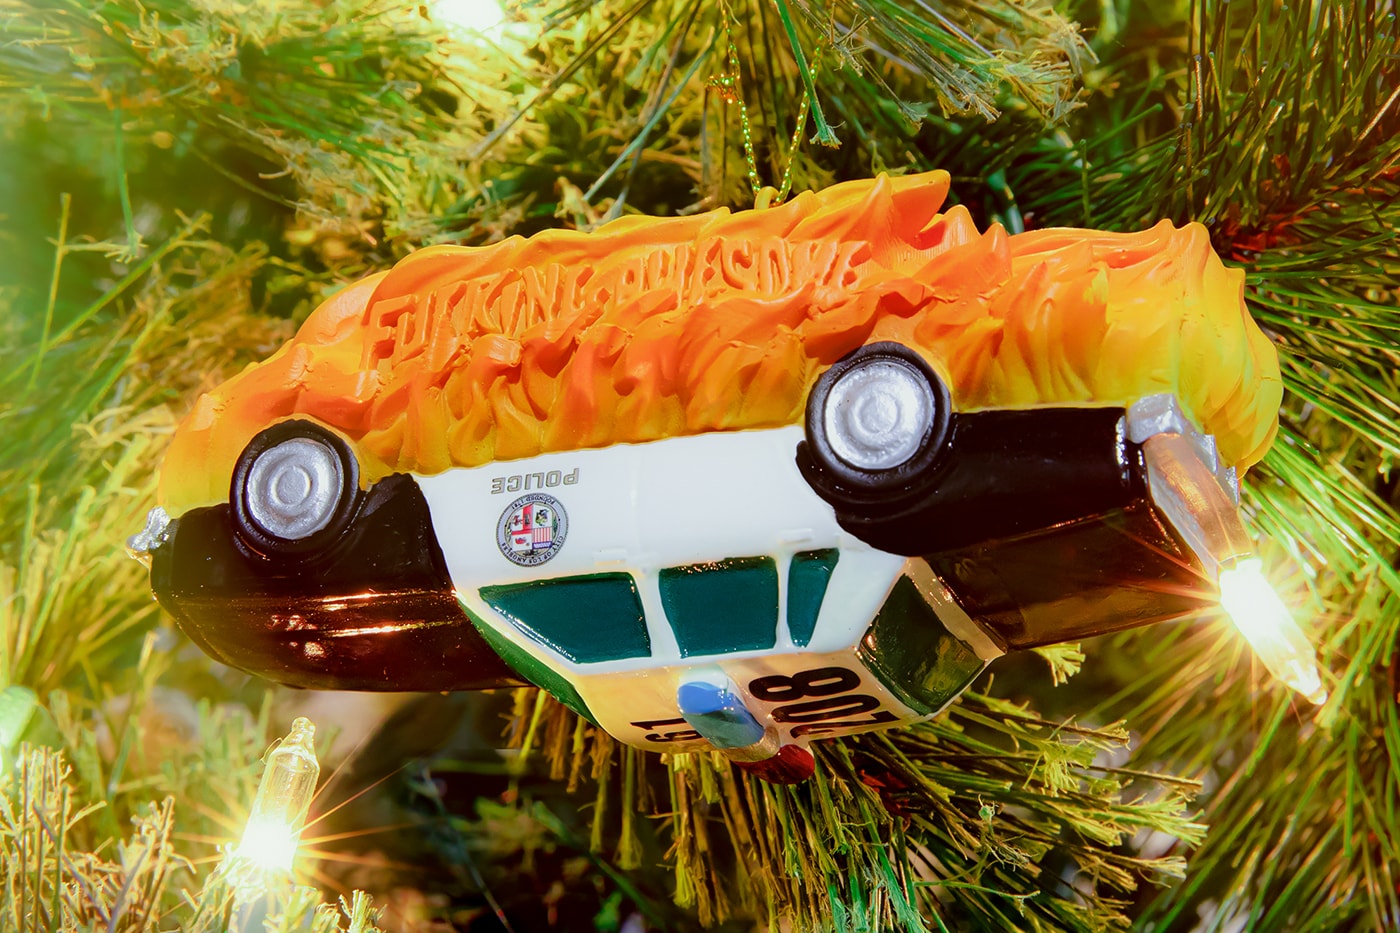 https://image-cdn.hypb.st/https%3A%2F%2Fhypebeast.com%2Fimage%2F2021%2F11%2Ffucking-awesome-cop-car-christmas-ornament-release-001.jpg?cbr=1&q=90